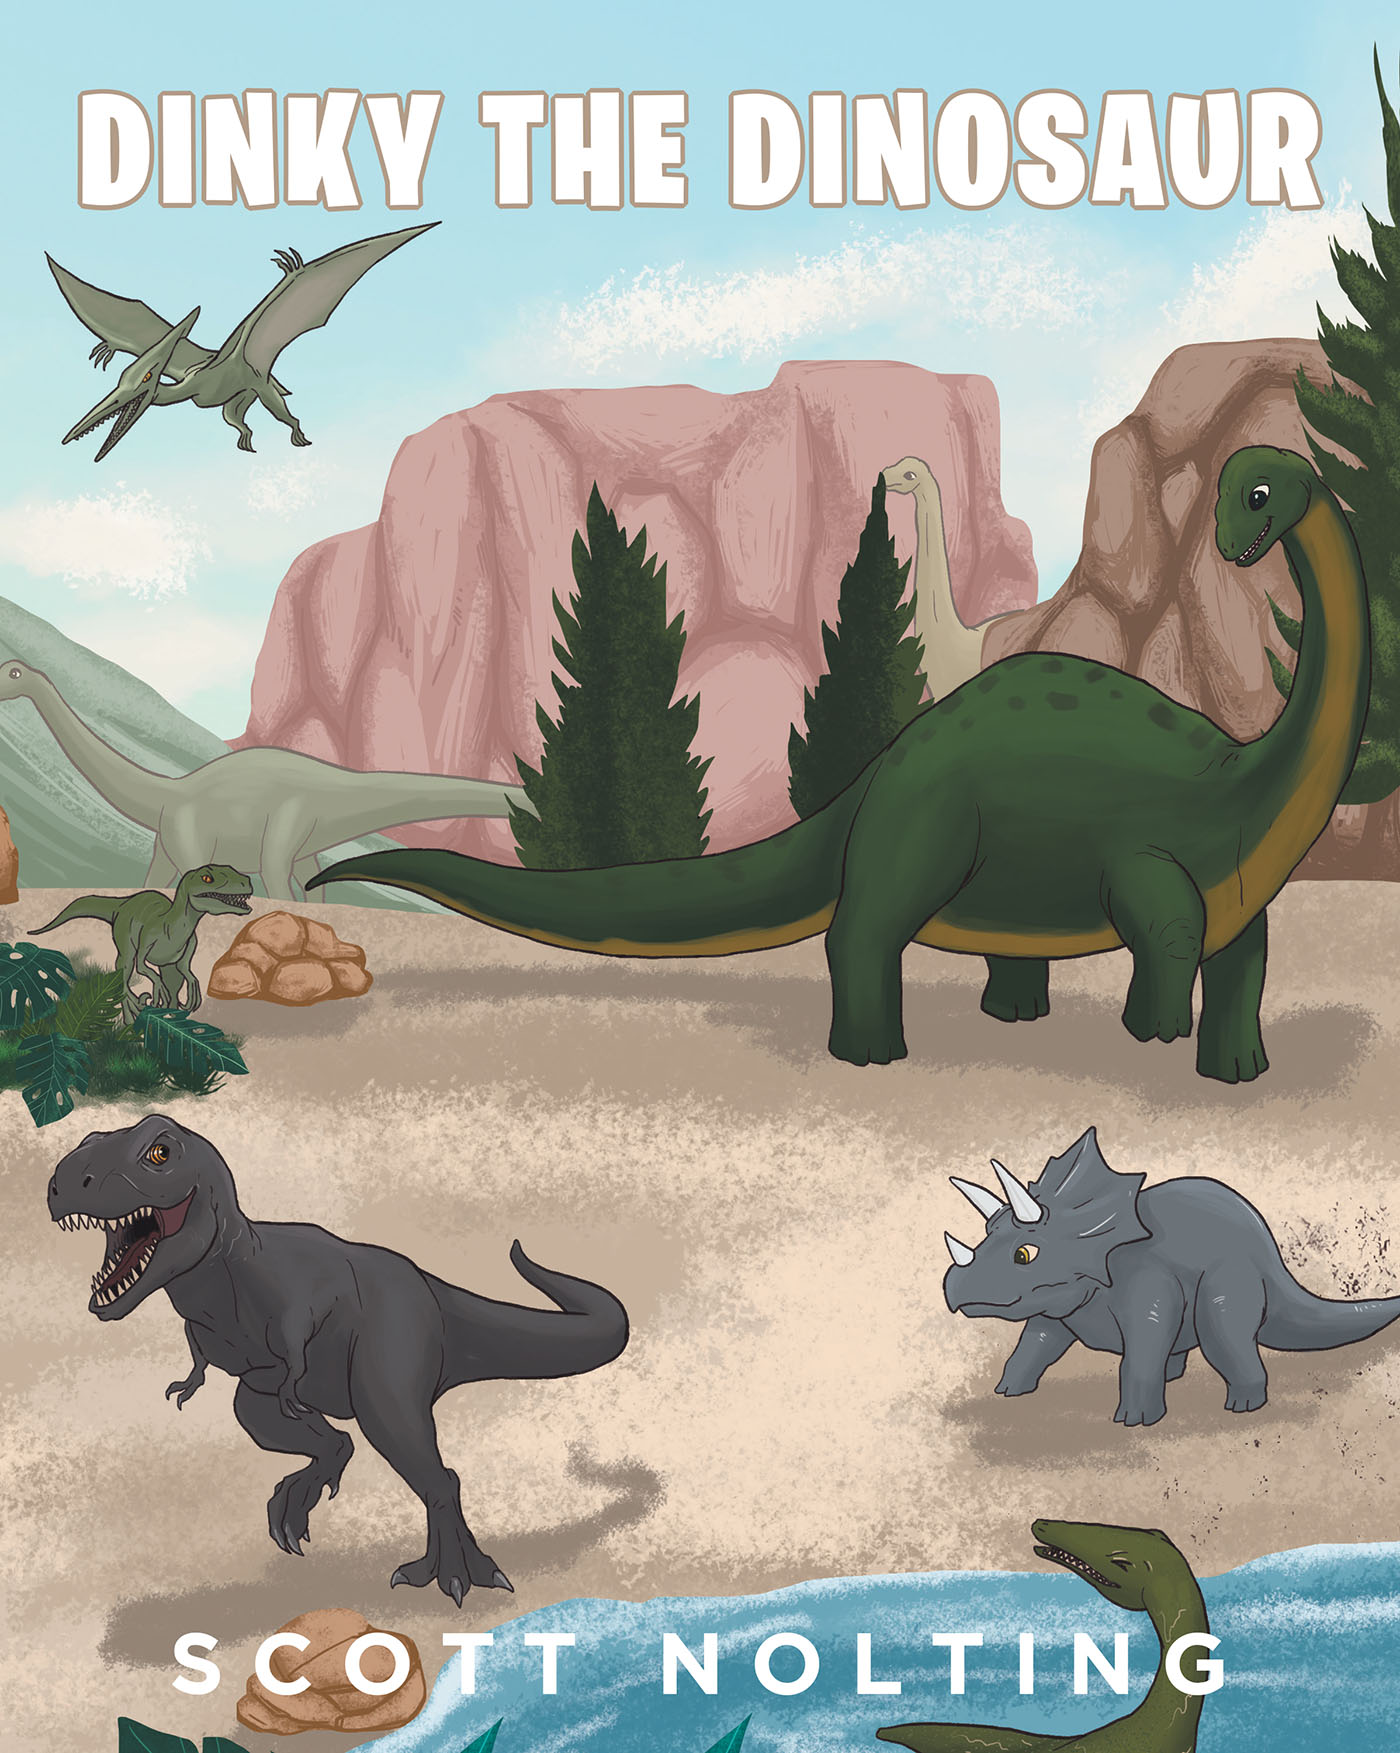 Scott Nolting’s New Book, "Dinky the Dinosaur," is a Mesmerizing Adventure of a Dinosaur Finding His Sense of Belongingness in the Vicious World of Prehistoric Era